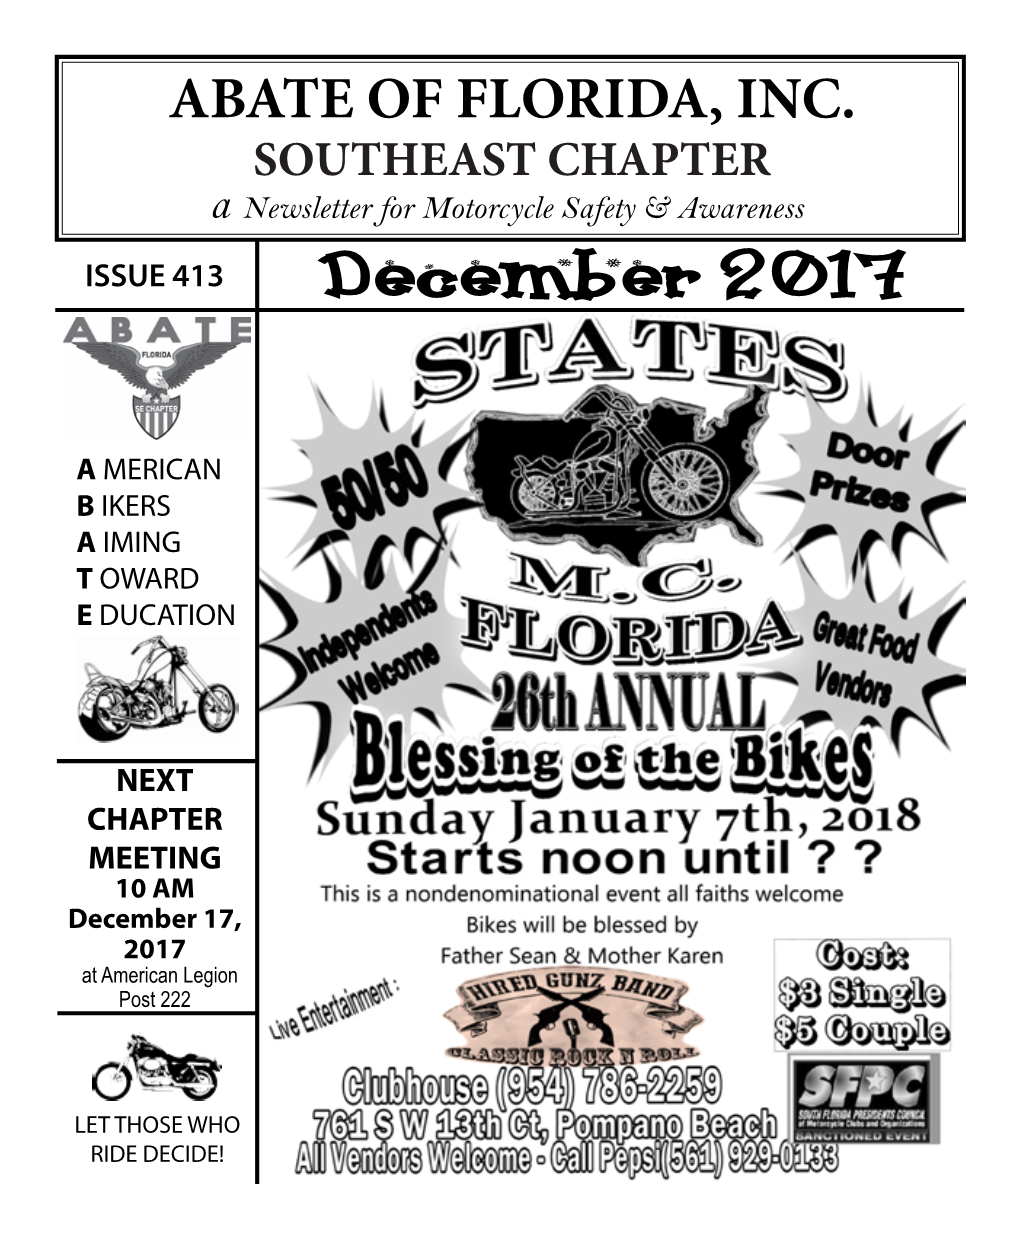 ABATE of FLORIDA, INC. SOUTHEAST CHAPTER a Newsletter for Motorcycle Safety & Awareness ISSUE 413